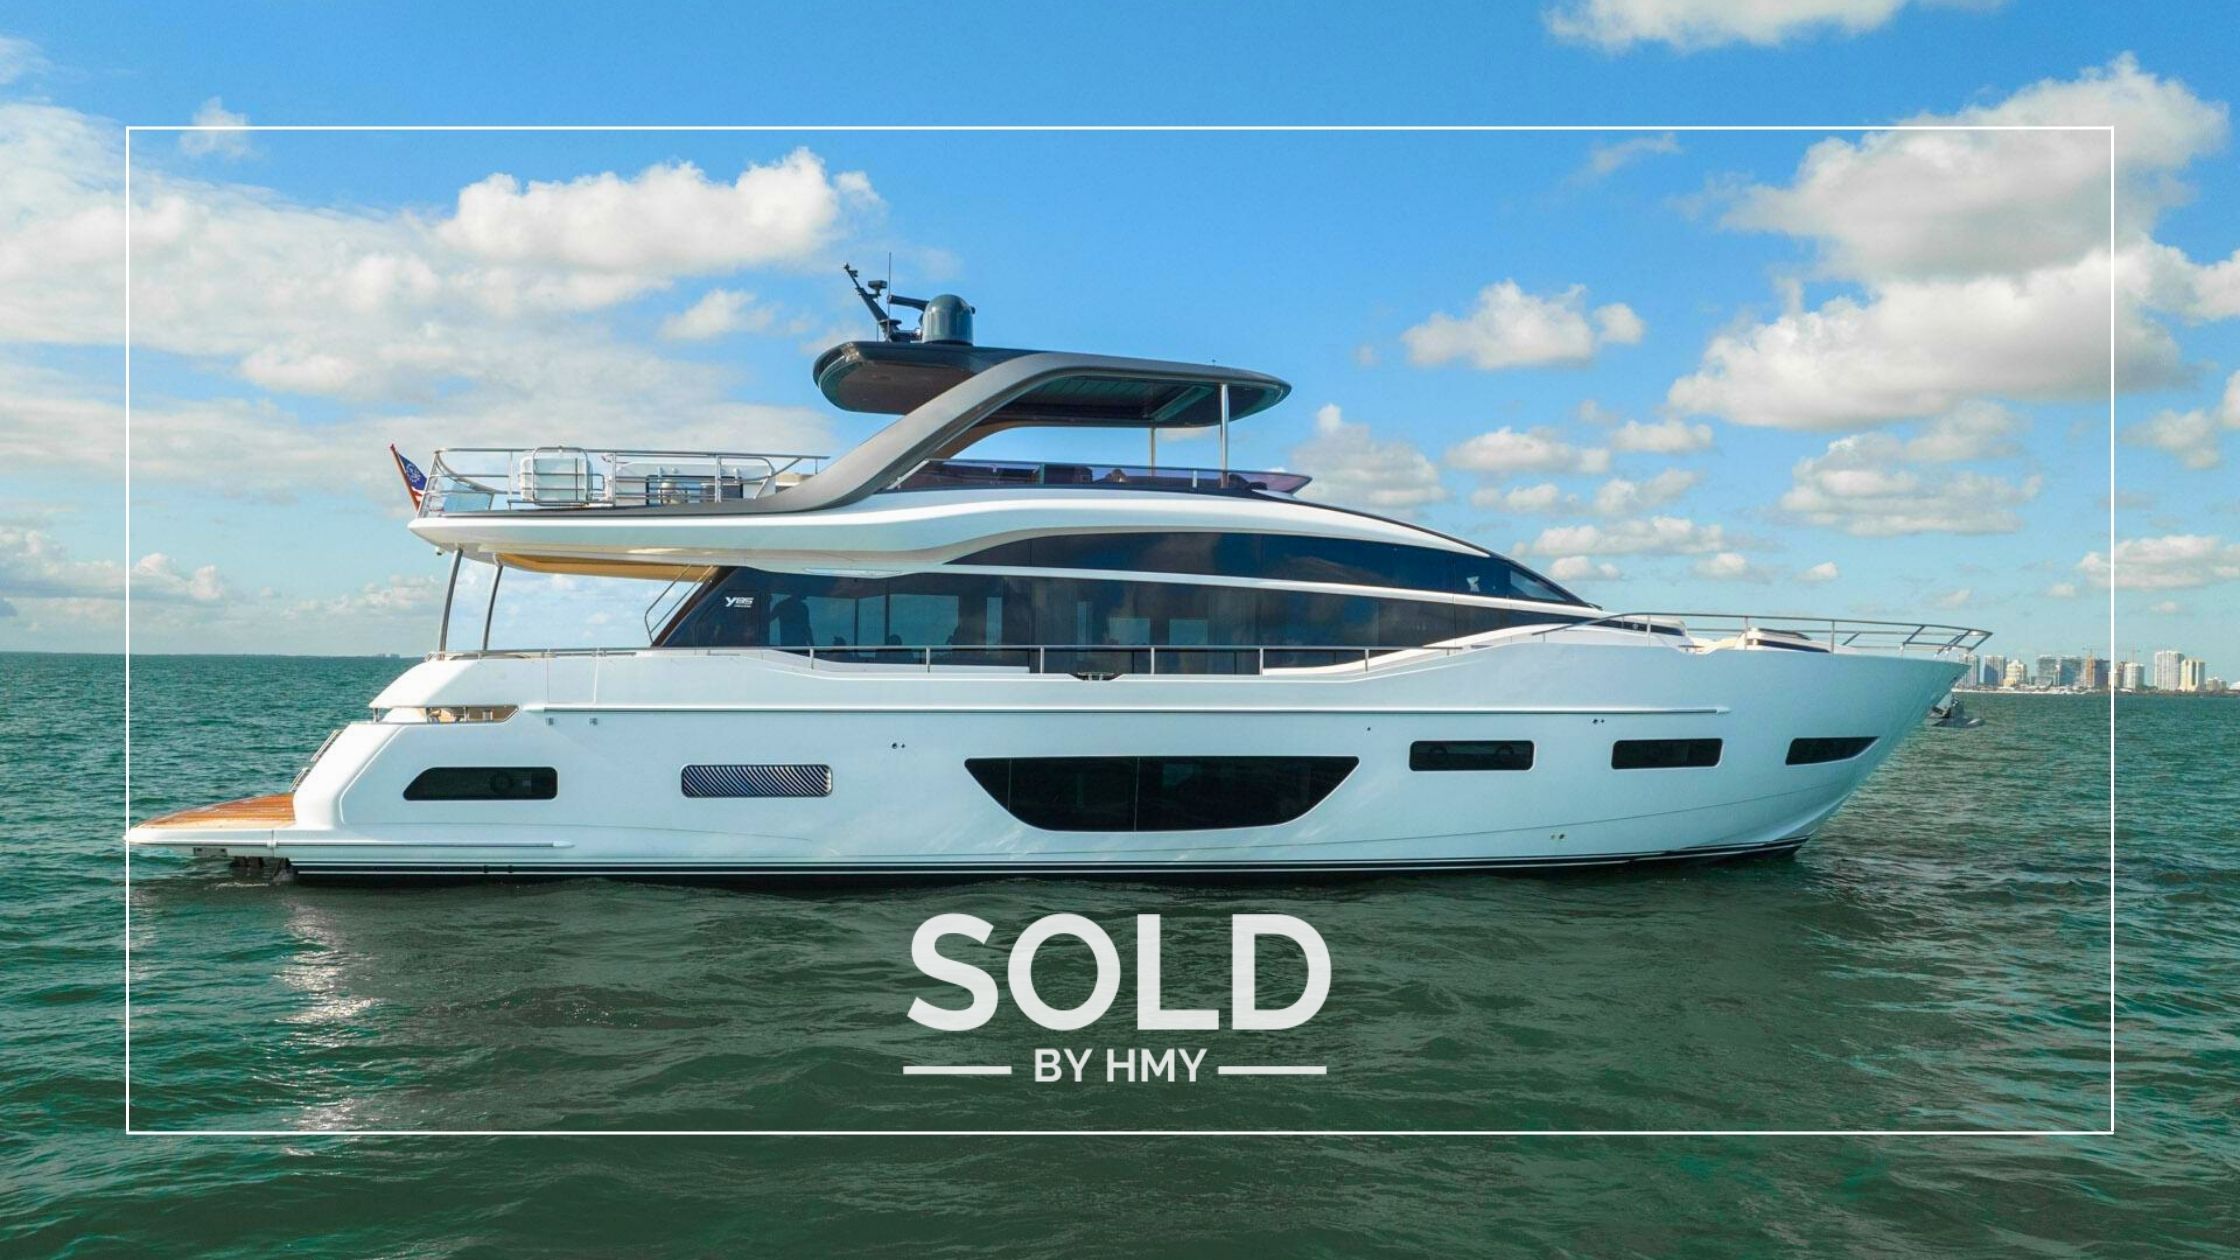 2021 Princess Y85 “Moon River” Sold In An In-House Deal By HMY